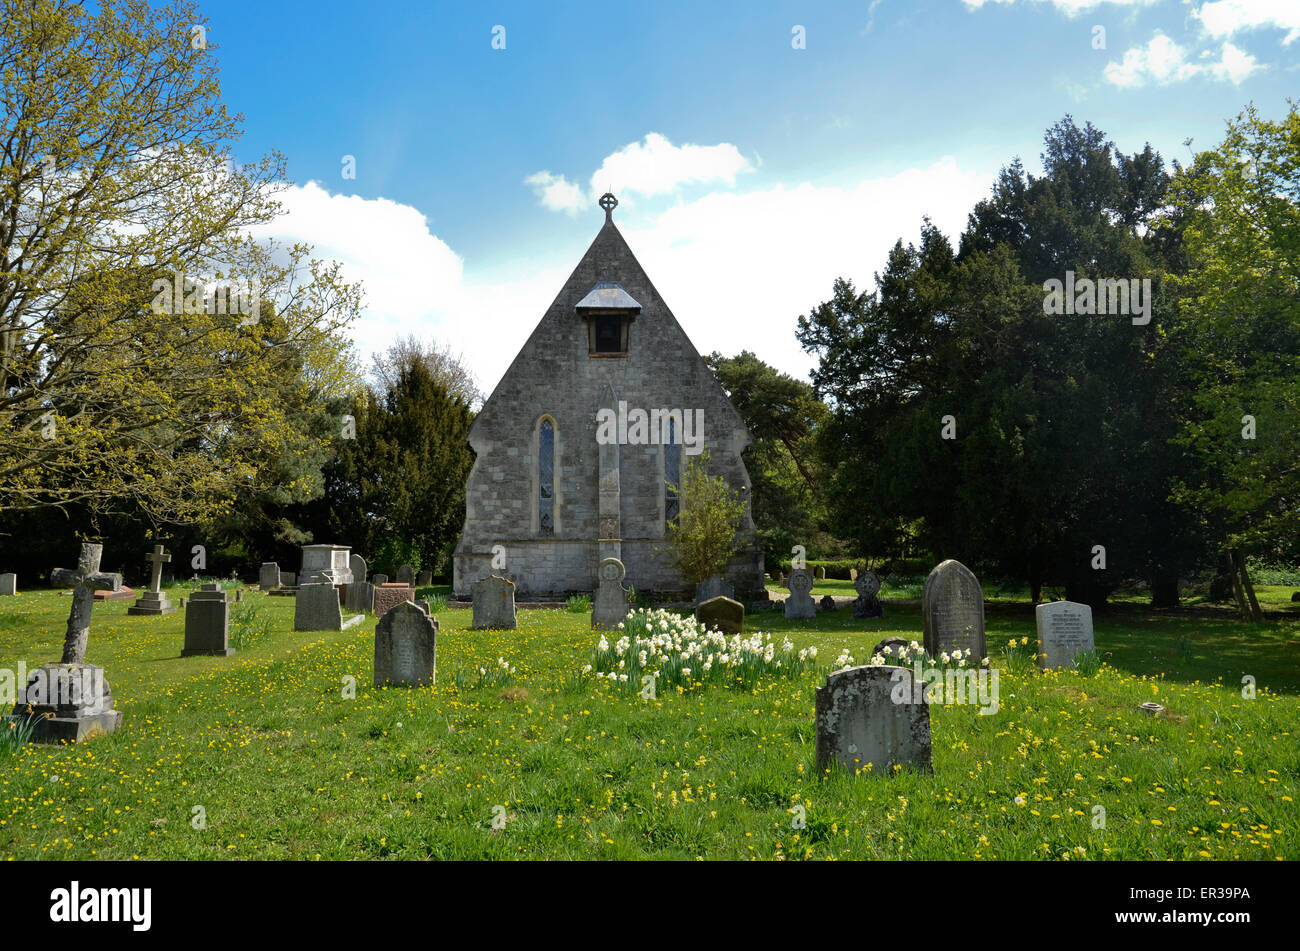 The church of St. Thomas in the Hertfordshire village of Perry Green. Stock Photo